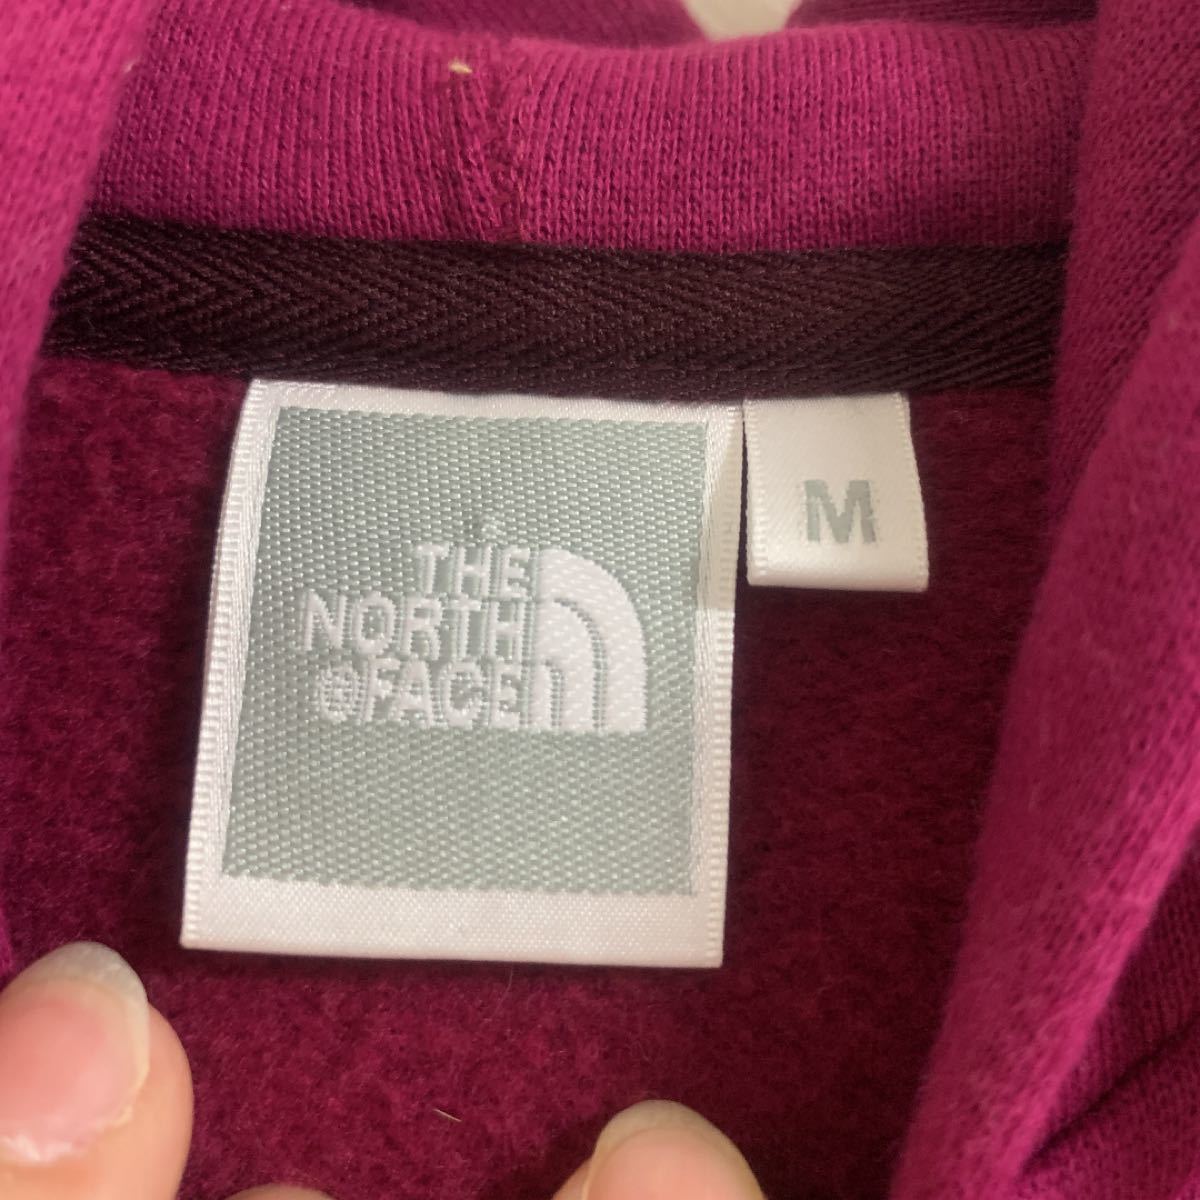 THE NORTH FACE パーカー